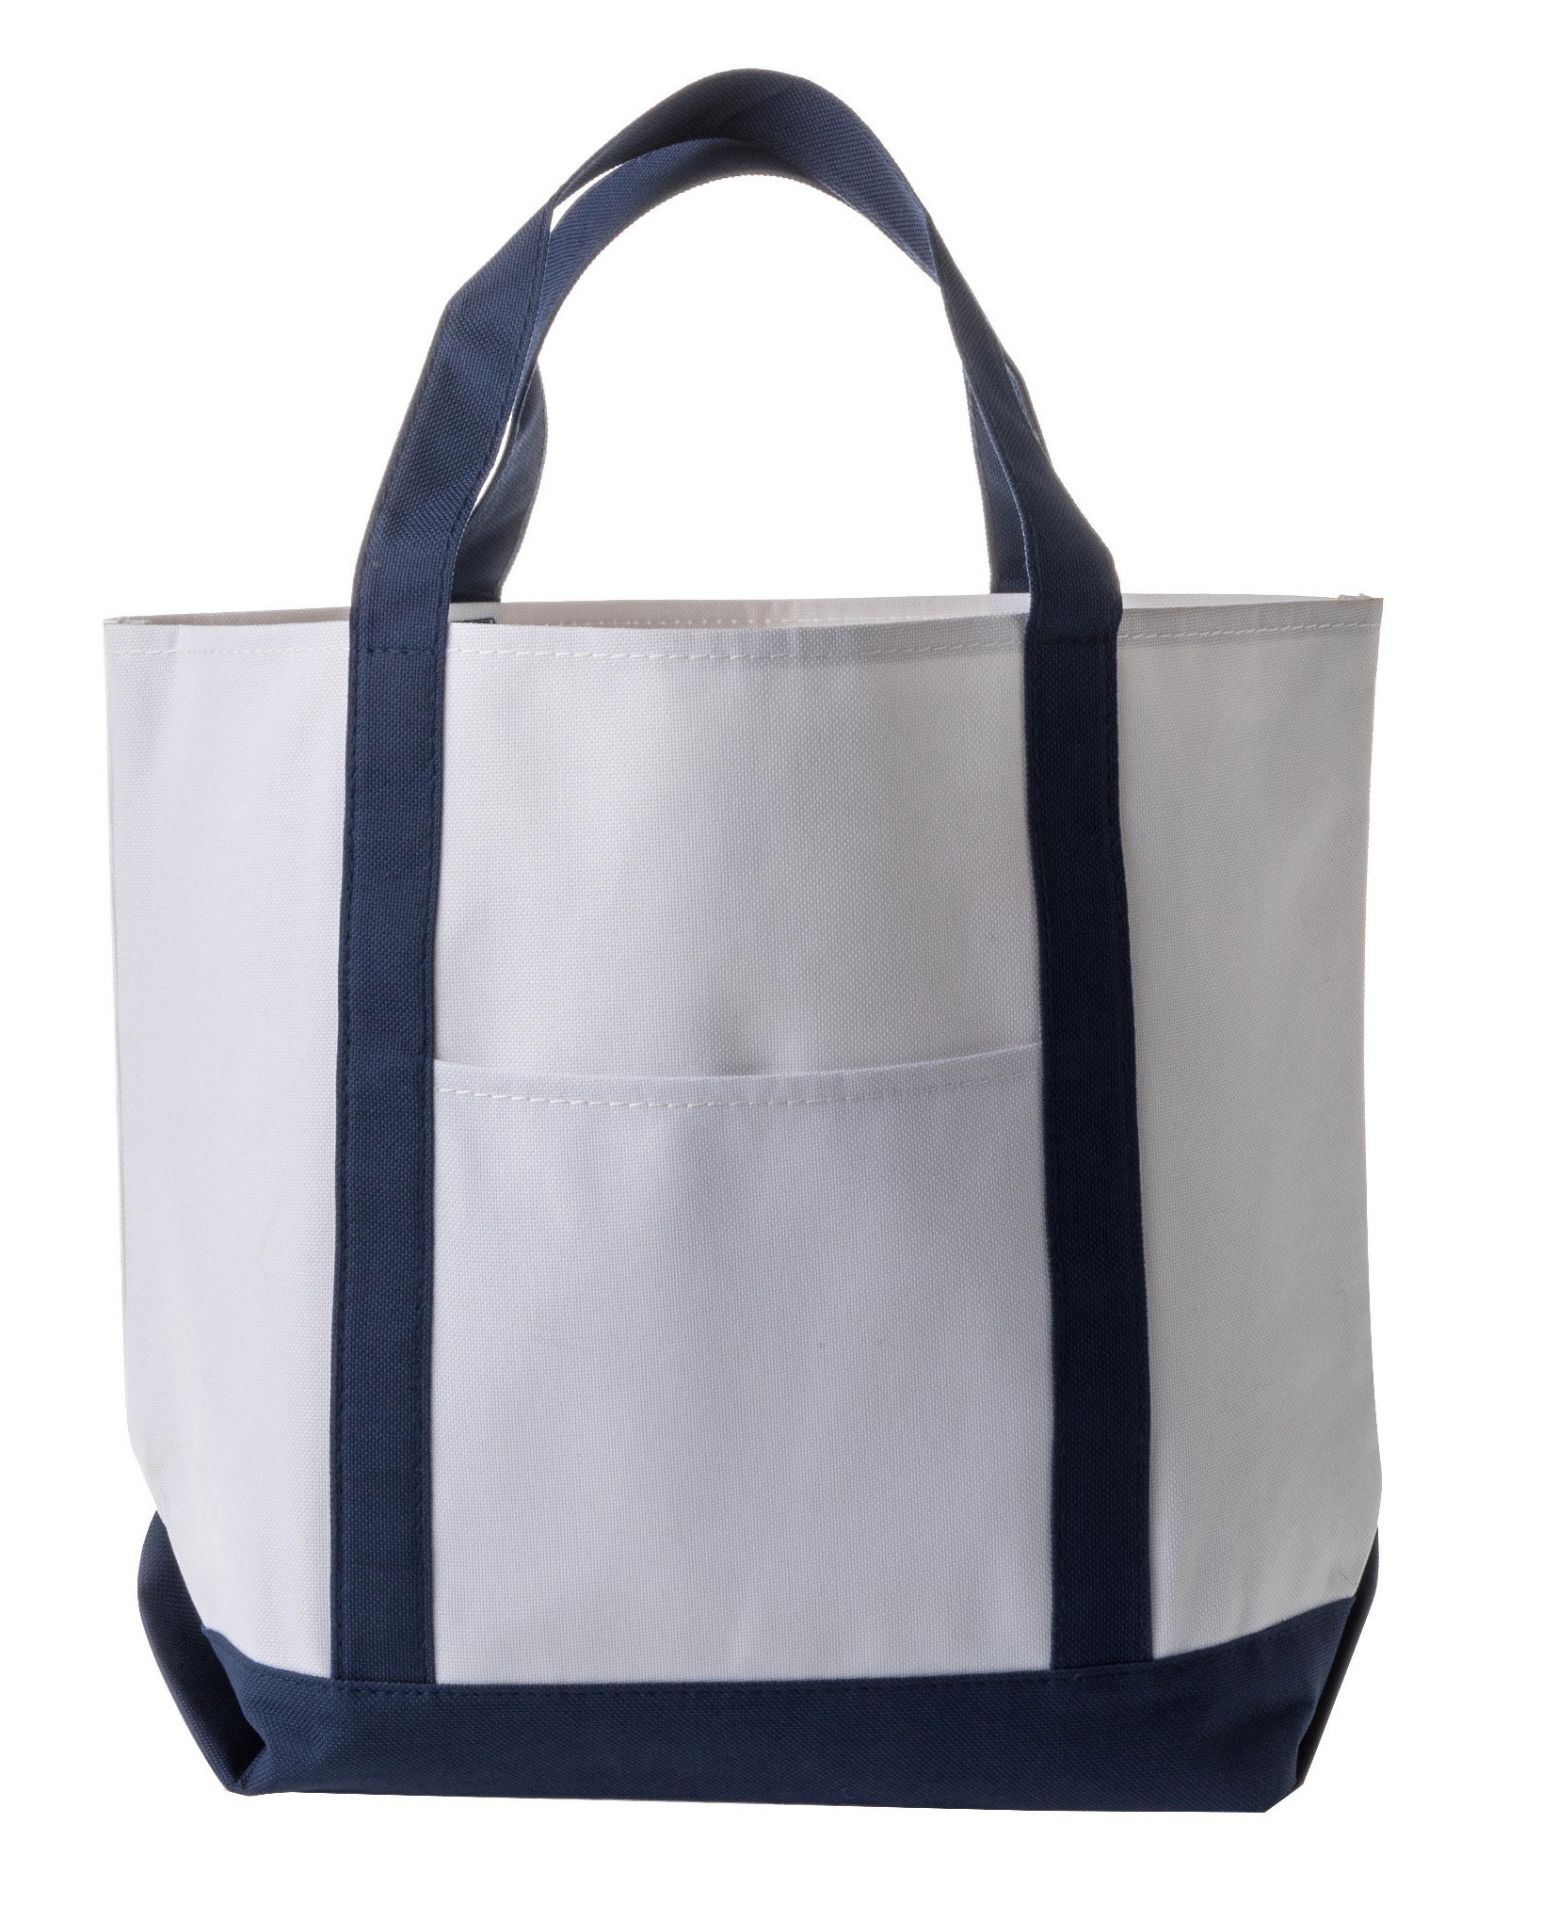 48 x Seashell Tote Bags - Colour White & Forest - Brand New Resale Stock - Size 280mm x 405mm x